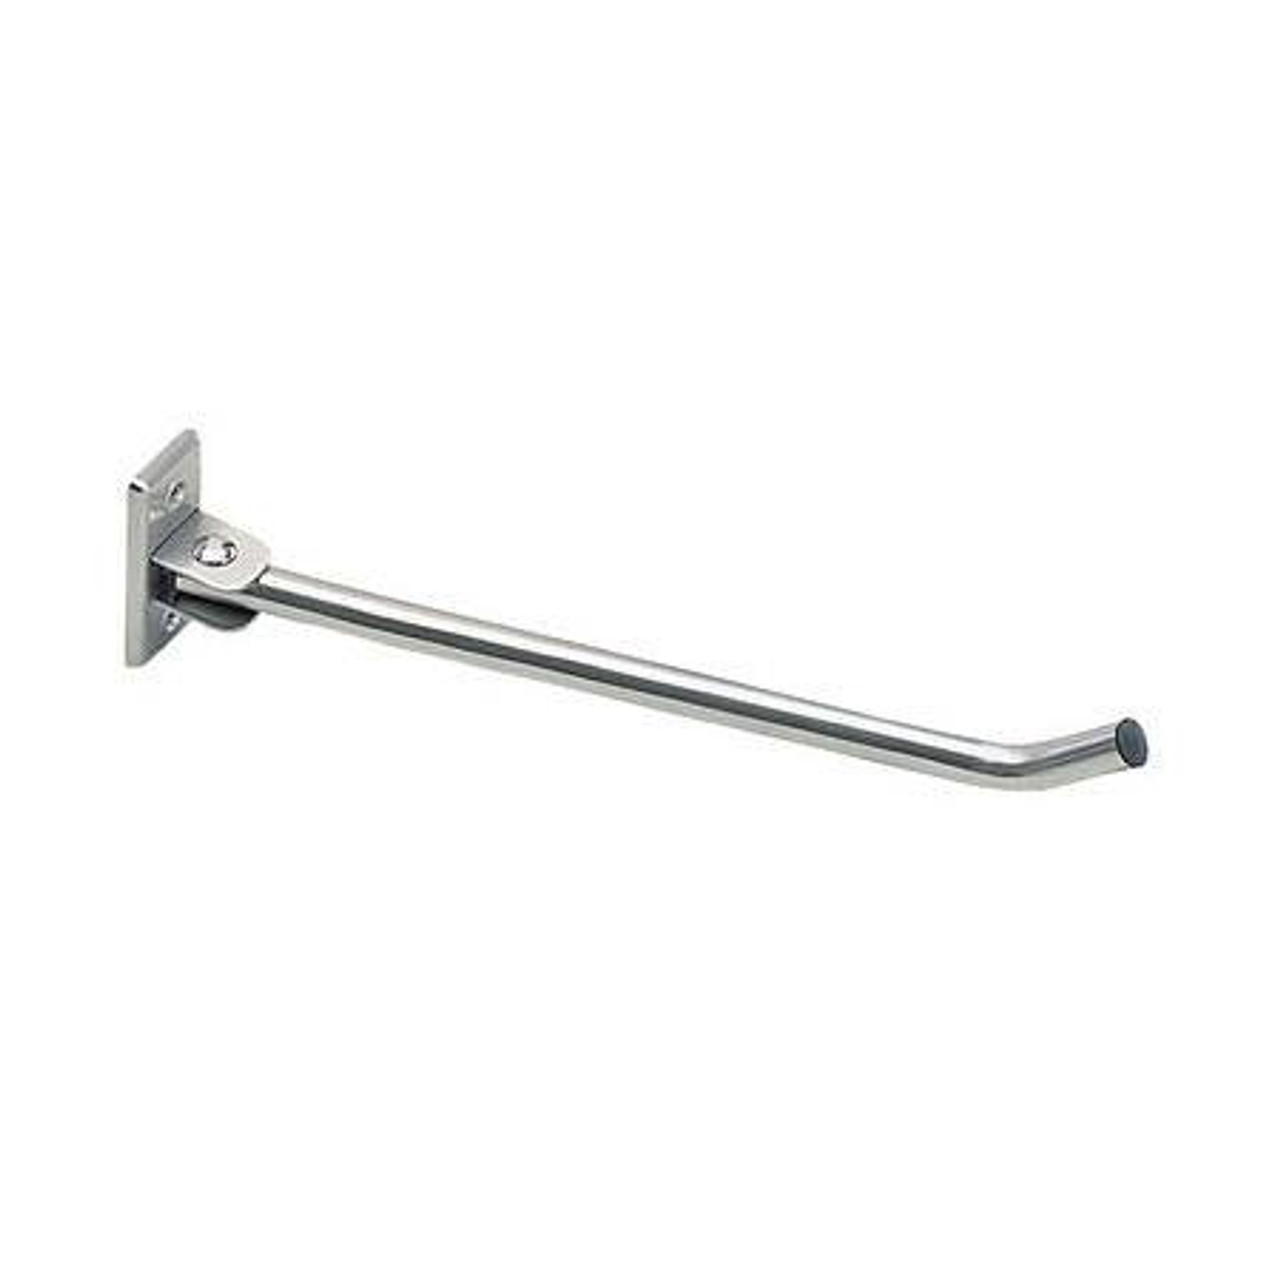 Richelieu Hardware 51124170 Contemporary Stainless Steel Hook, Stainless Steel